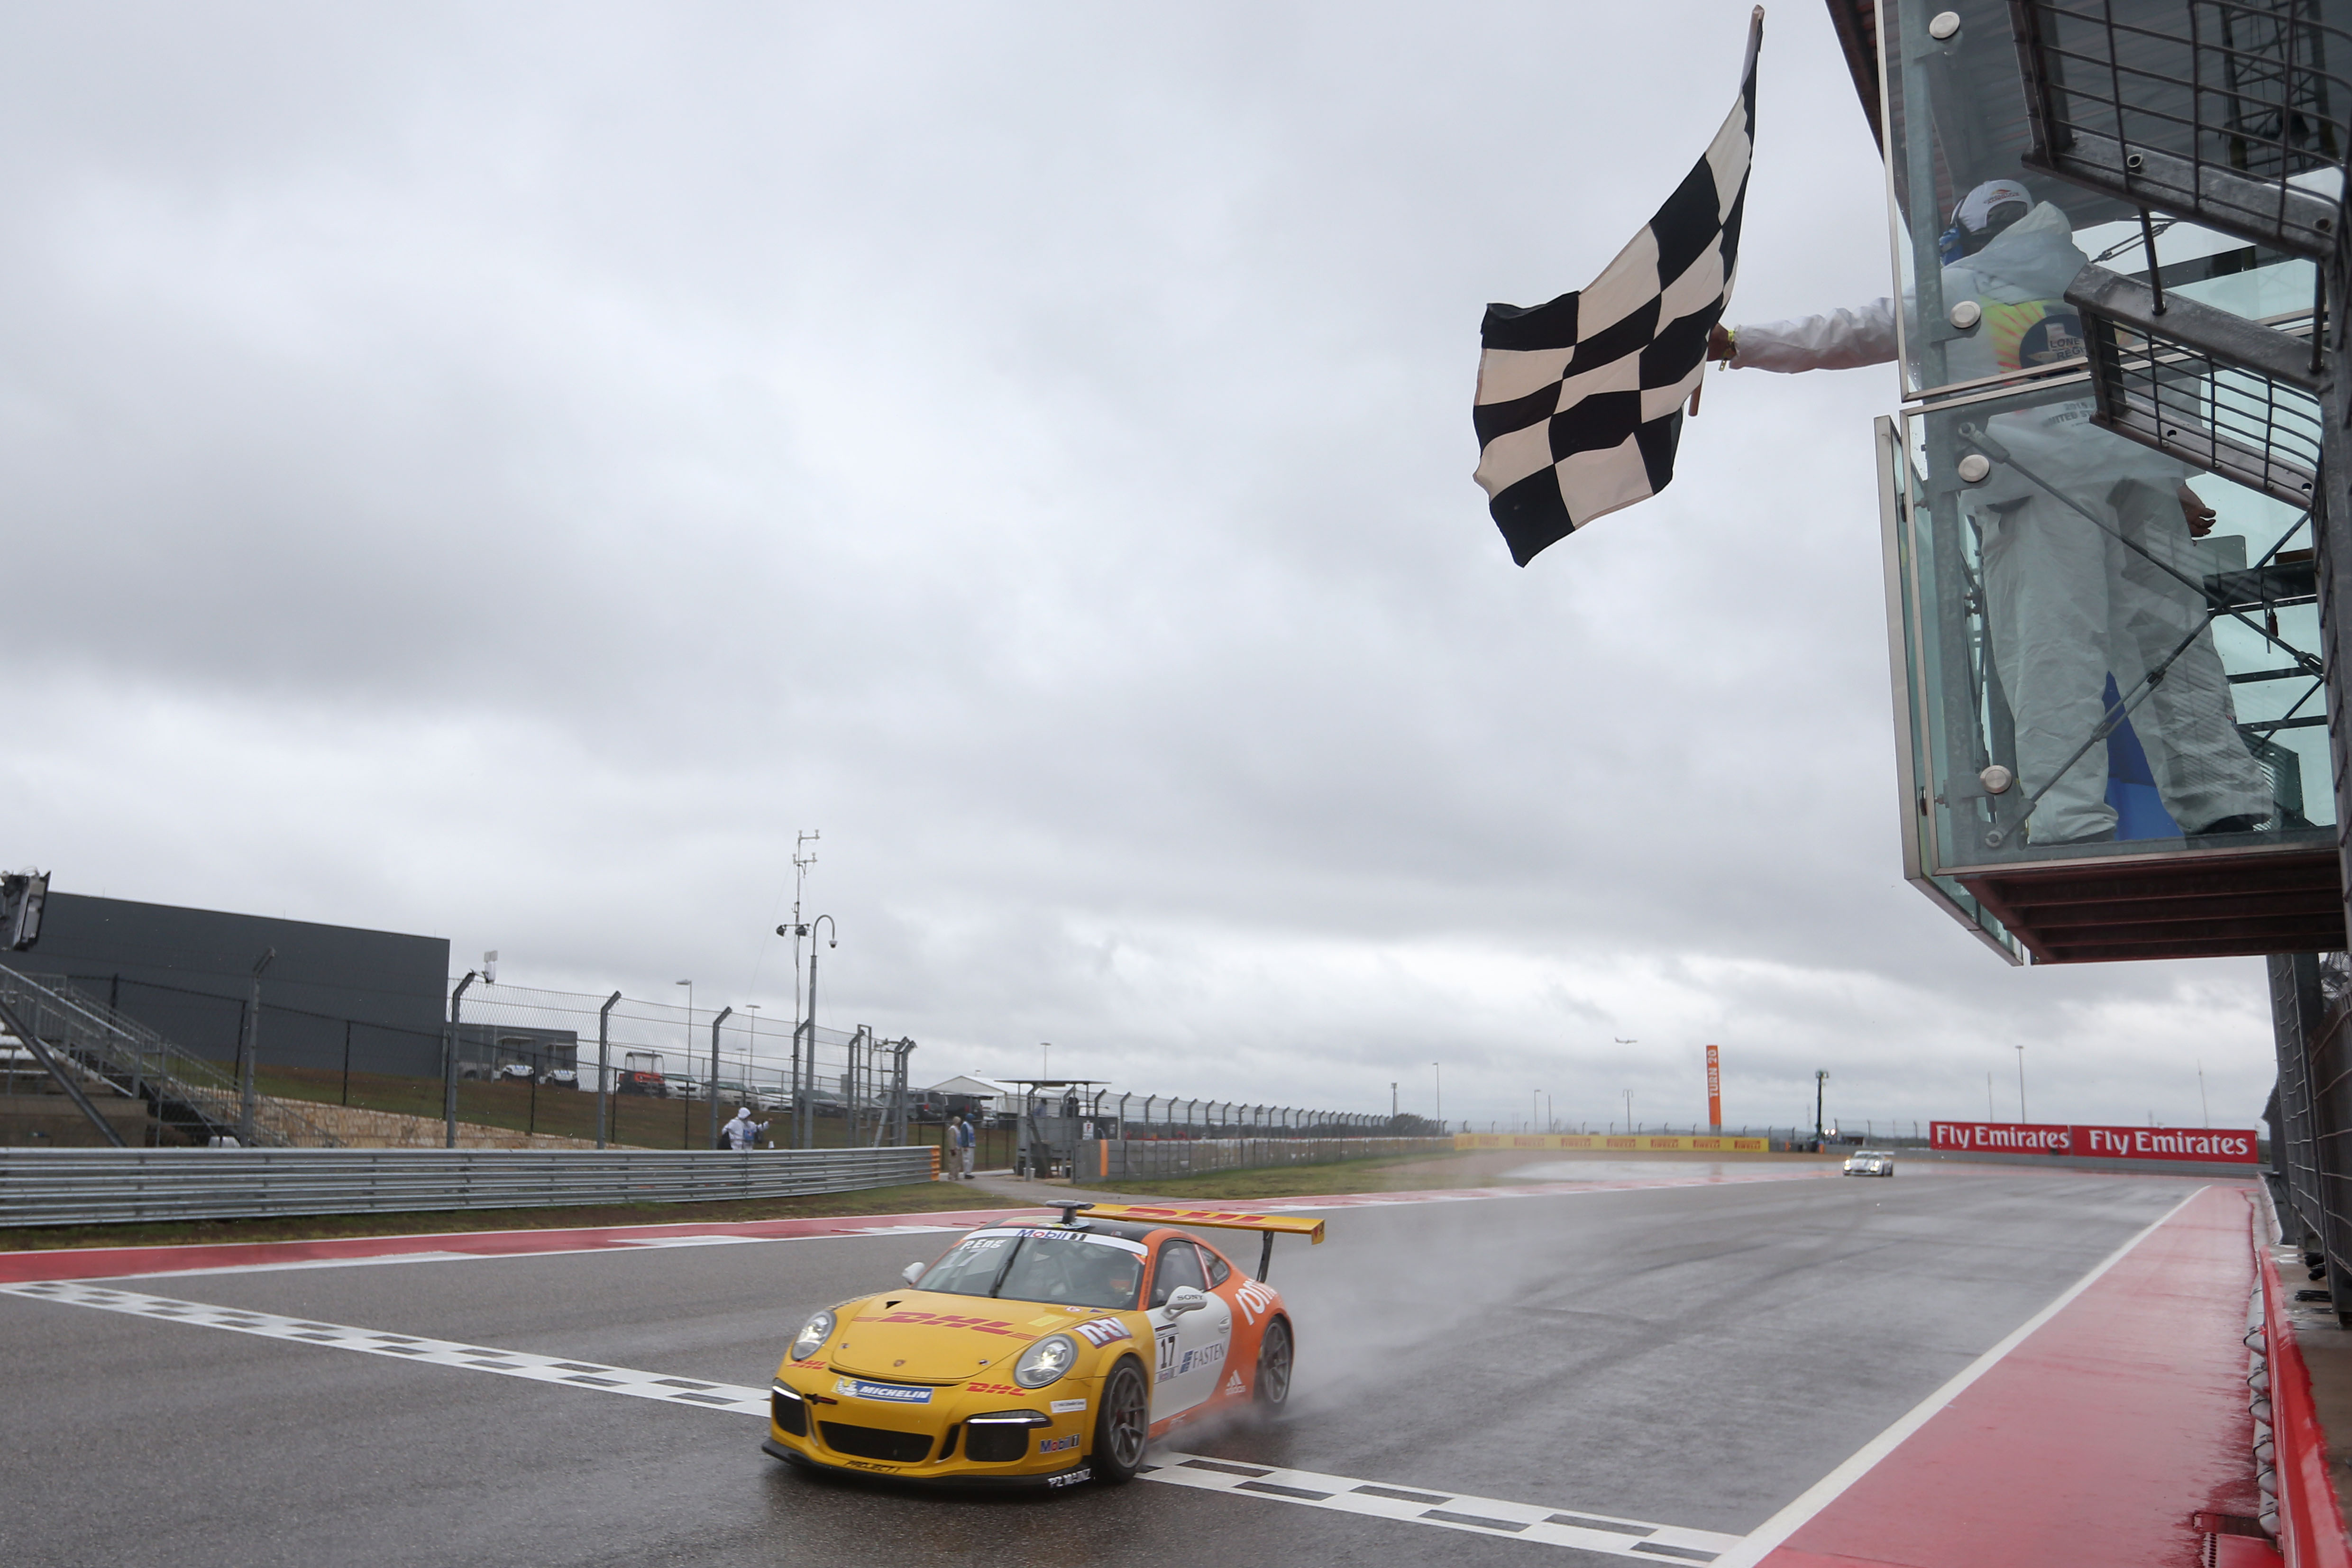 Eng, champion in the rain of Austin